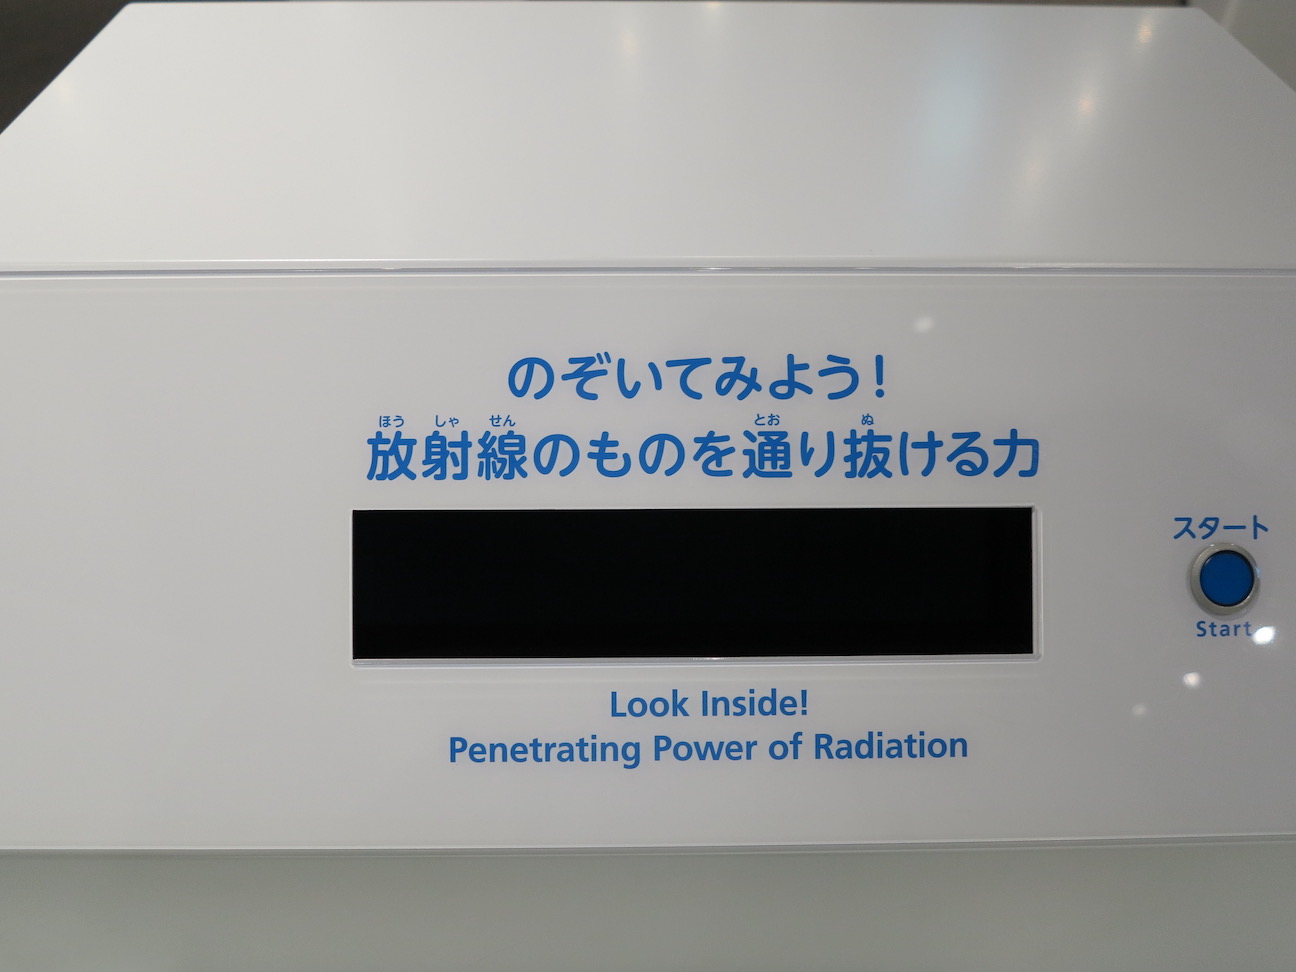 A large white metal piece of equipment with a small black window says, "Look inside! Penetrating Power of Radiation." A start button is to the left of the window and text.